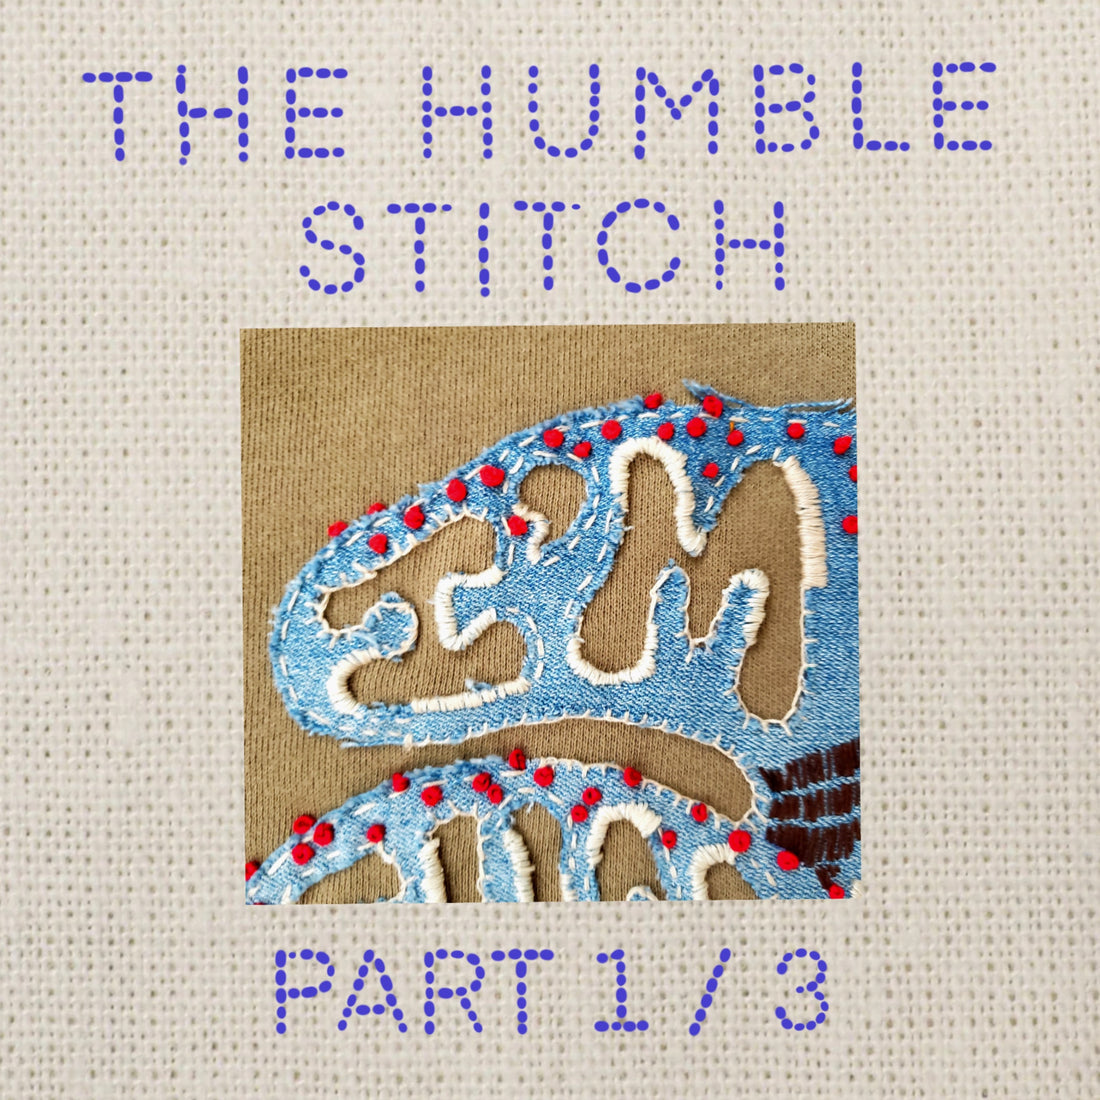 The Humble Stitch Textile Series by MildaMade